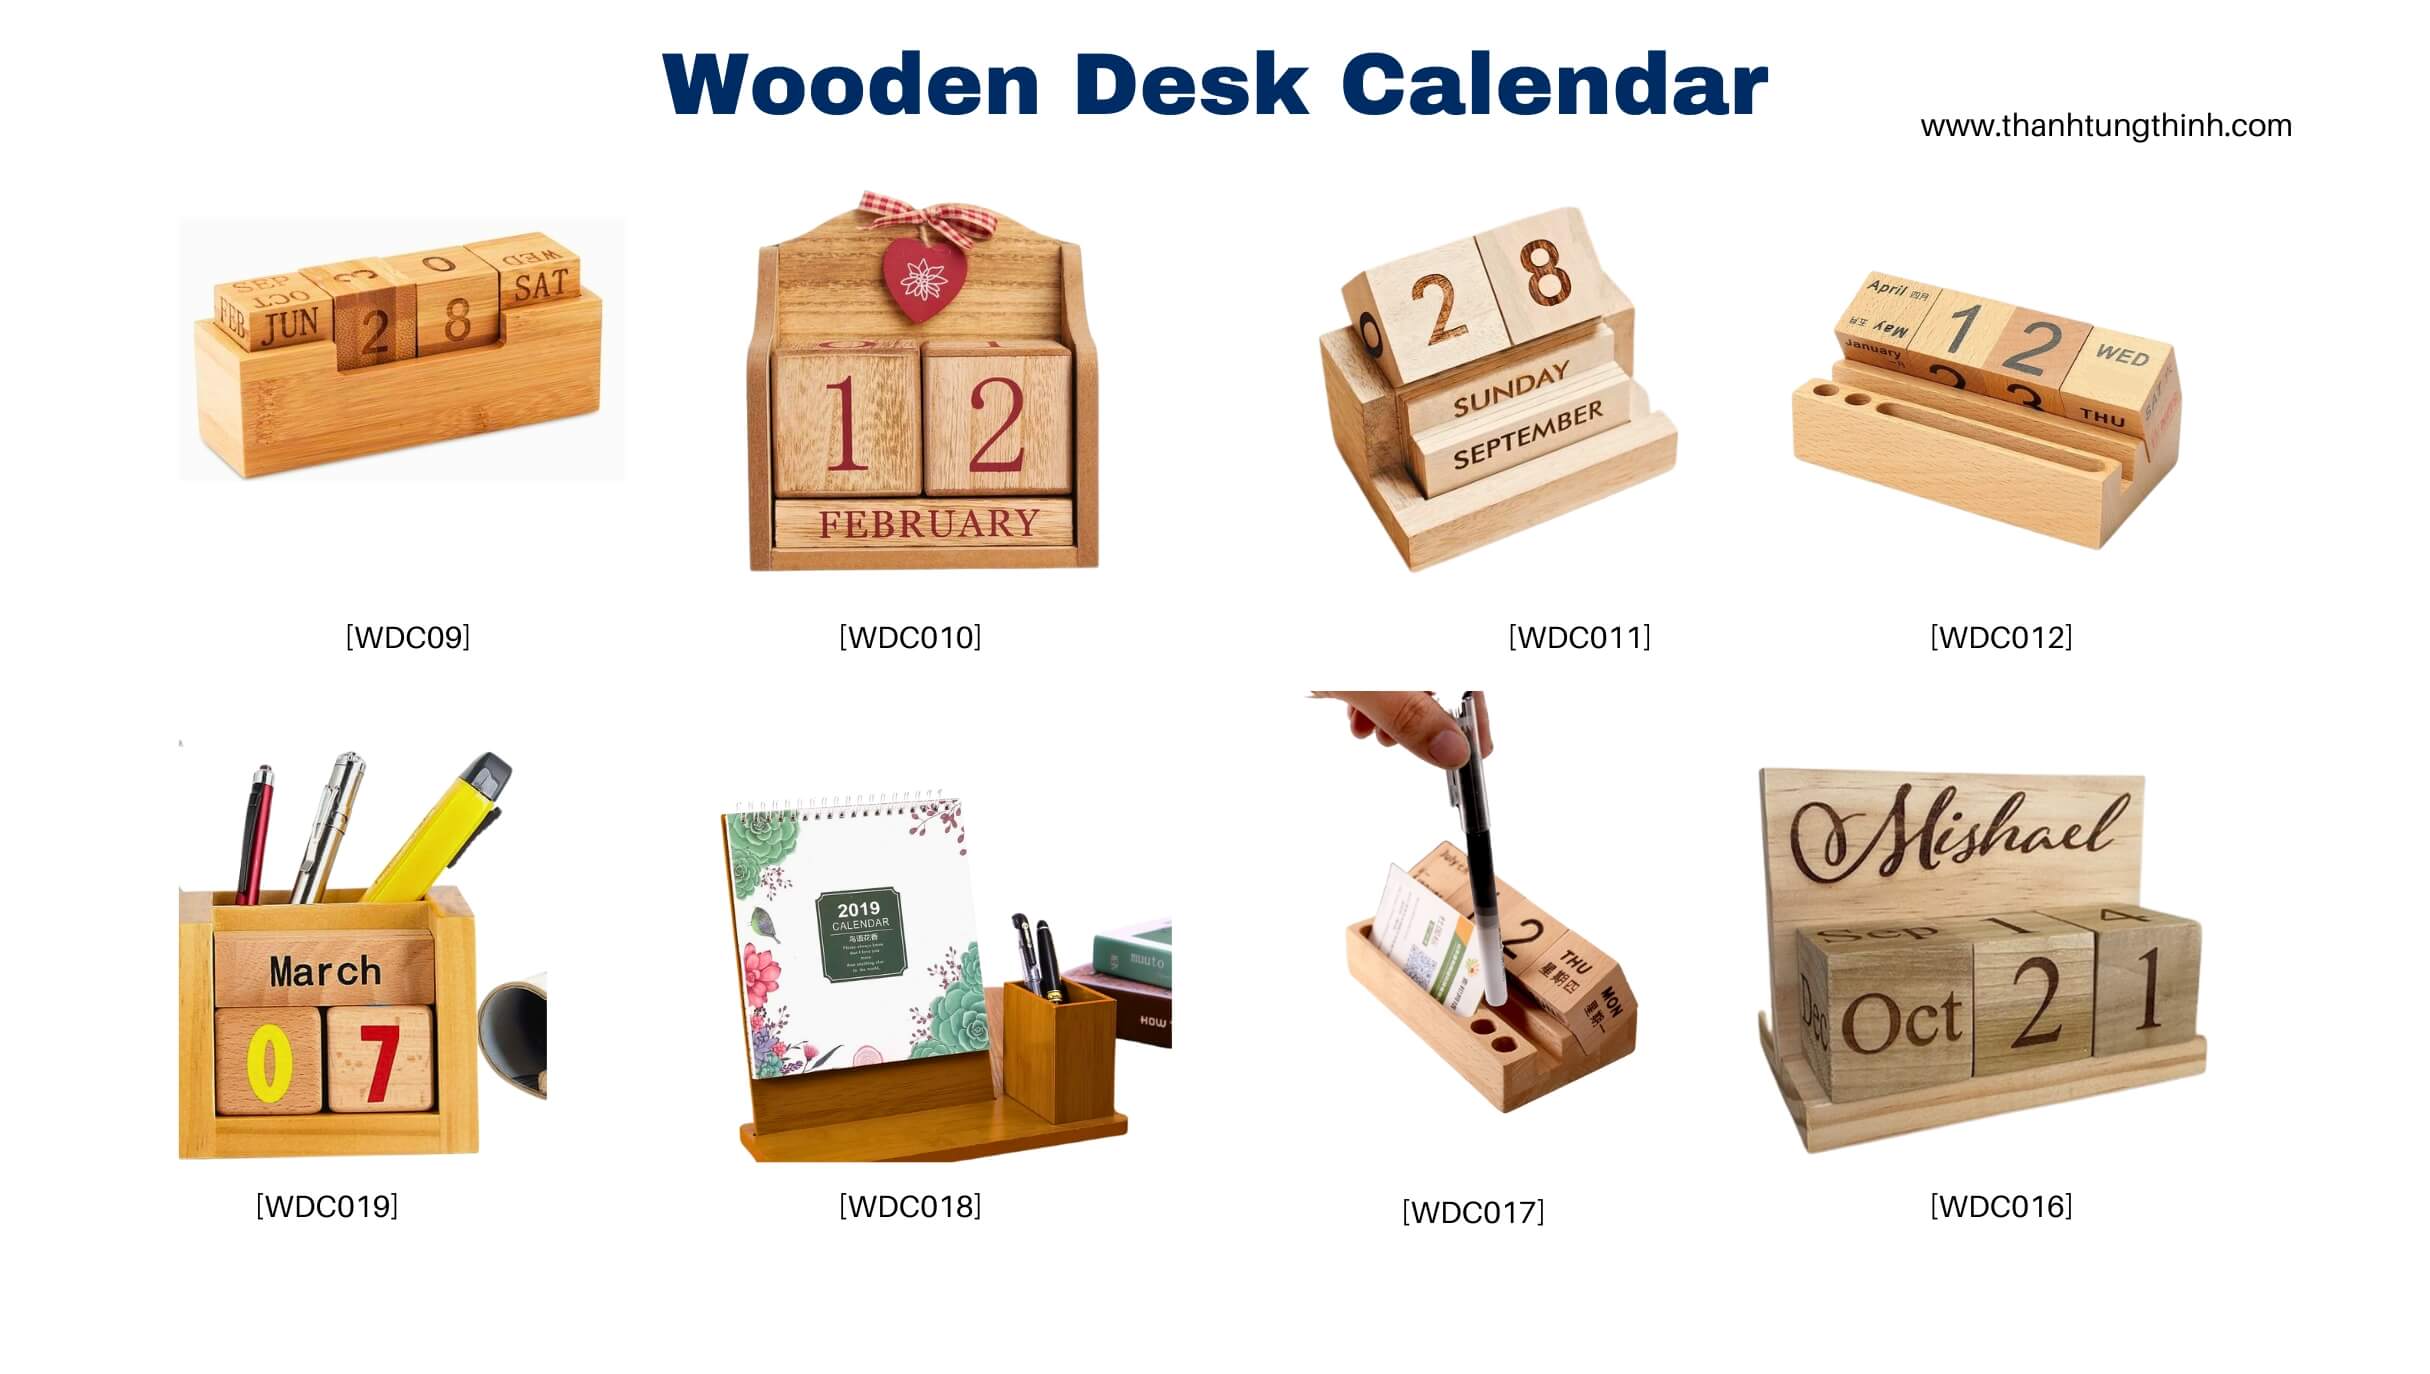 The ultimate guide to choosing the wholesale wooden desk calendar supplier